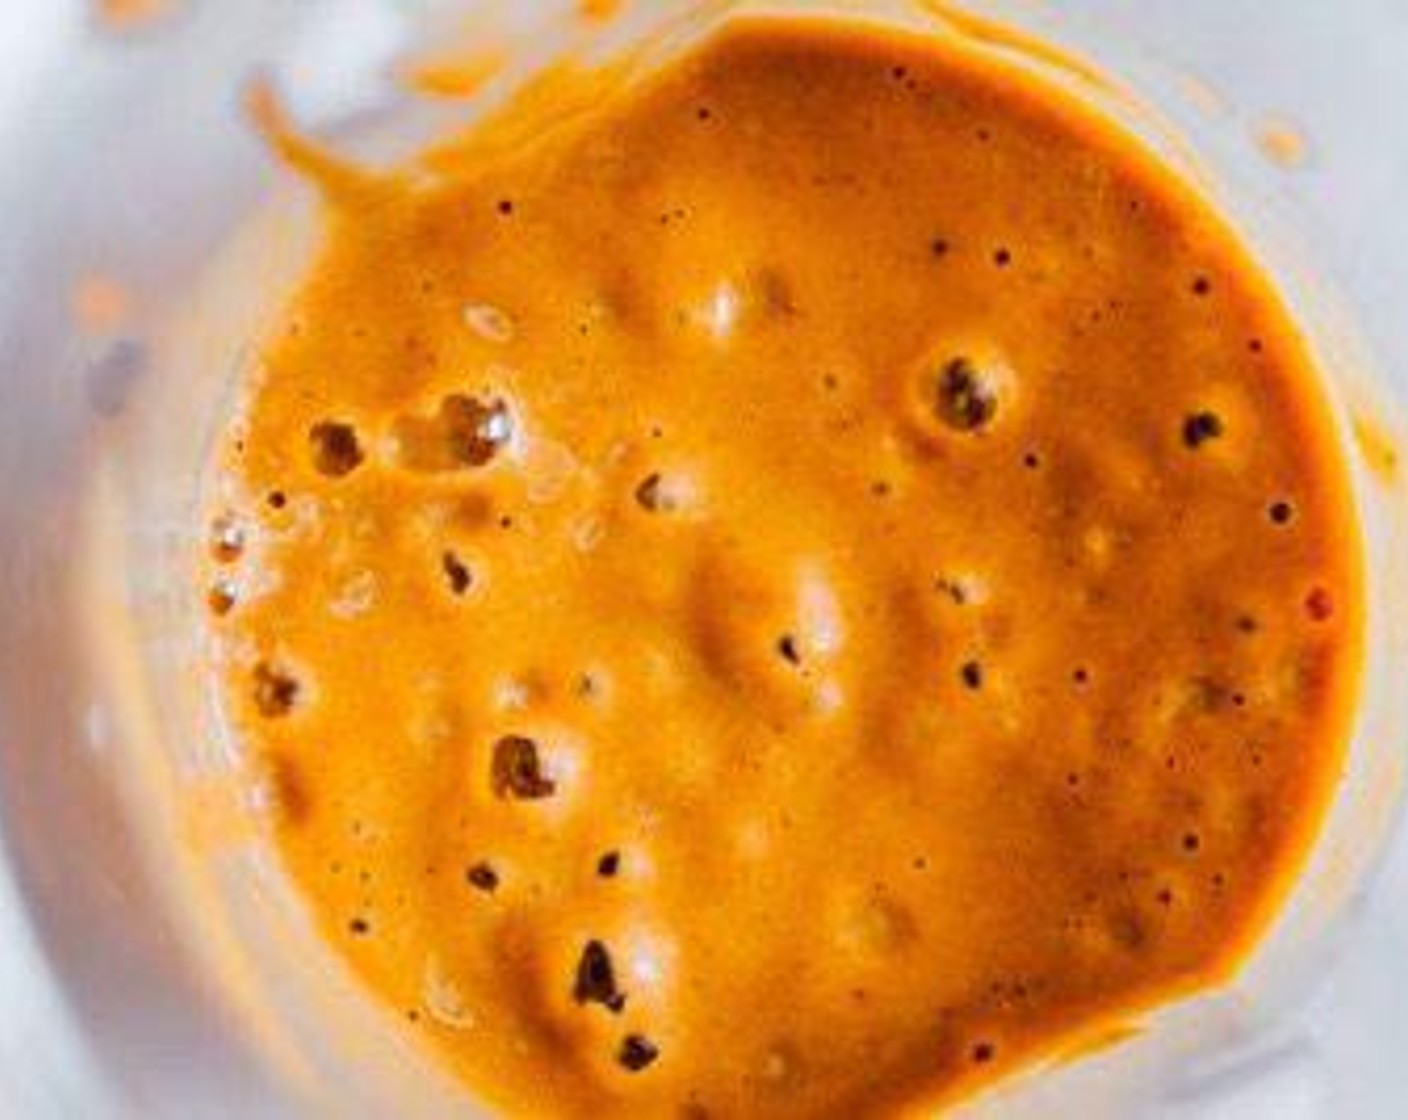 step 1 Blend Canned Pumpkin Purée (1/2 cup), Milk (1/2 cup), Coffee (1/2 cup), Banana (1), Maple Syrup (2 Tbsp), Ground Cinnamon (1 tsp), Ground Ginger (1/4 tsp), Ground Nutmeg (1/4 tsp), Ground Cloves (1 pinch), and Ground Allspice (1 pinch) until smooth.